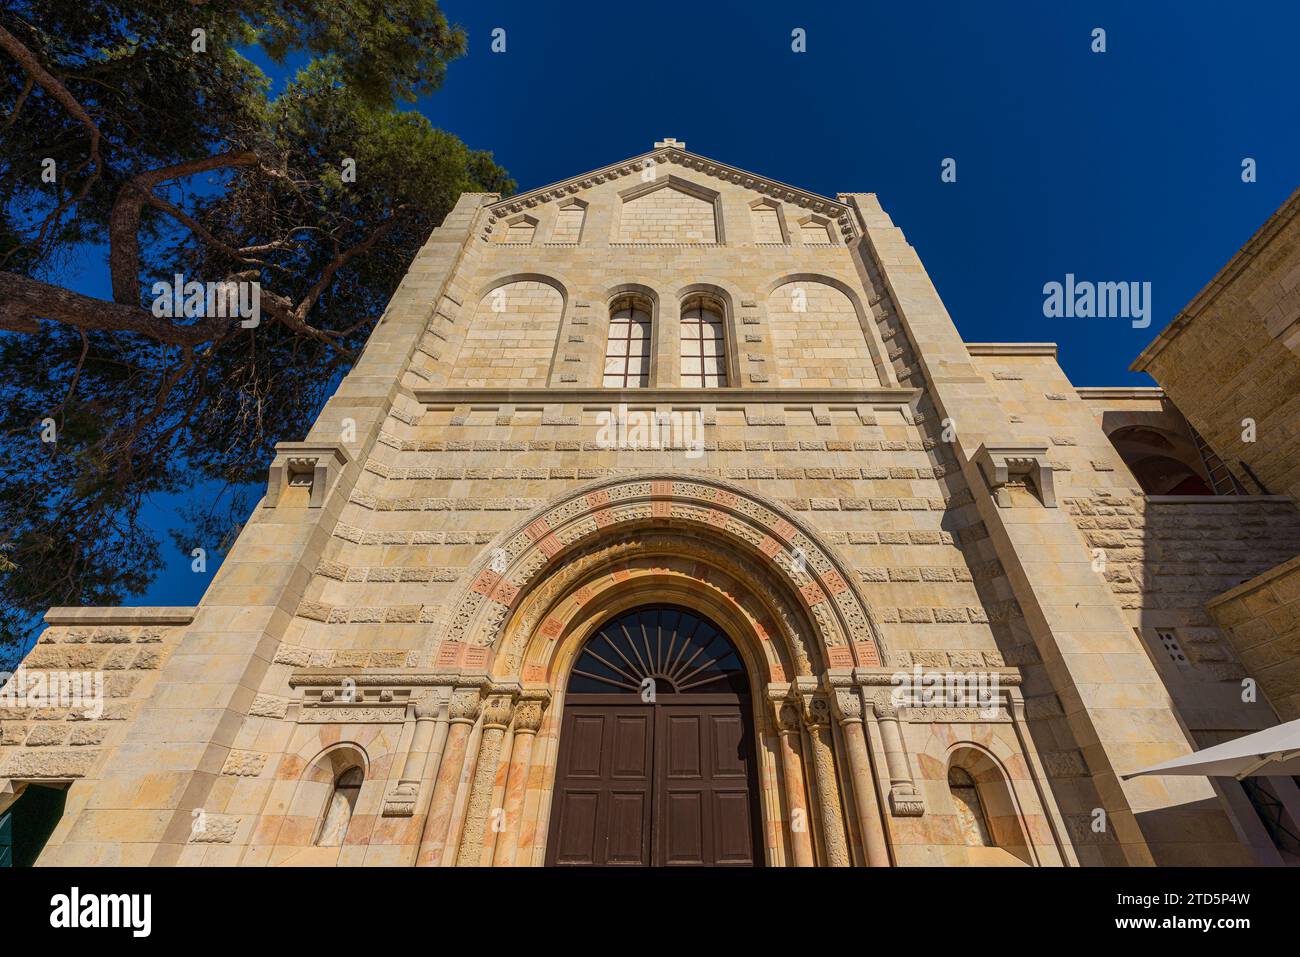 Exterior view of the Dormition Abbey, a Christian temple in Jerusalem, Israel Stock Photo